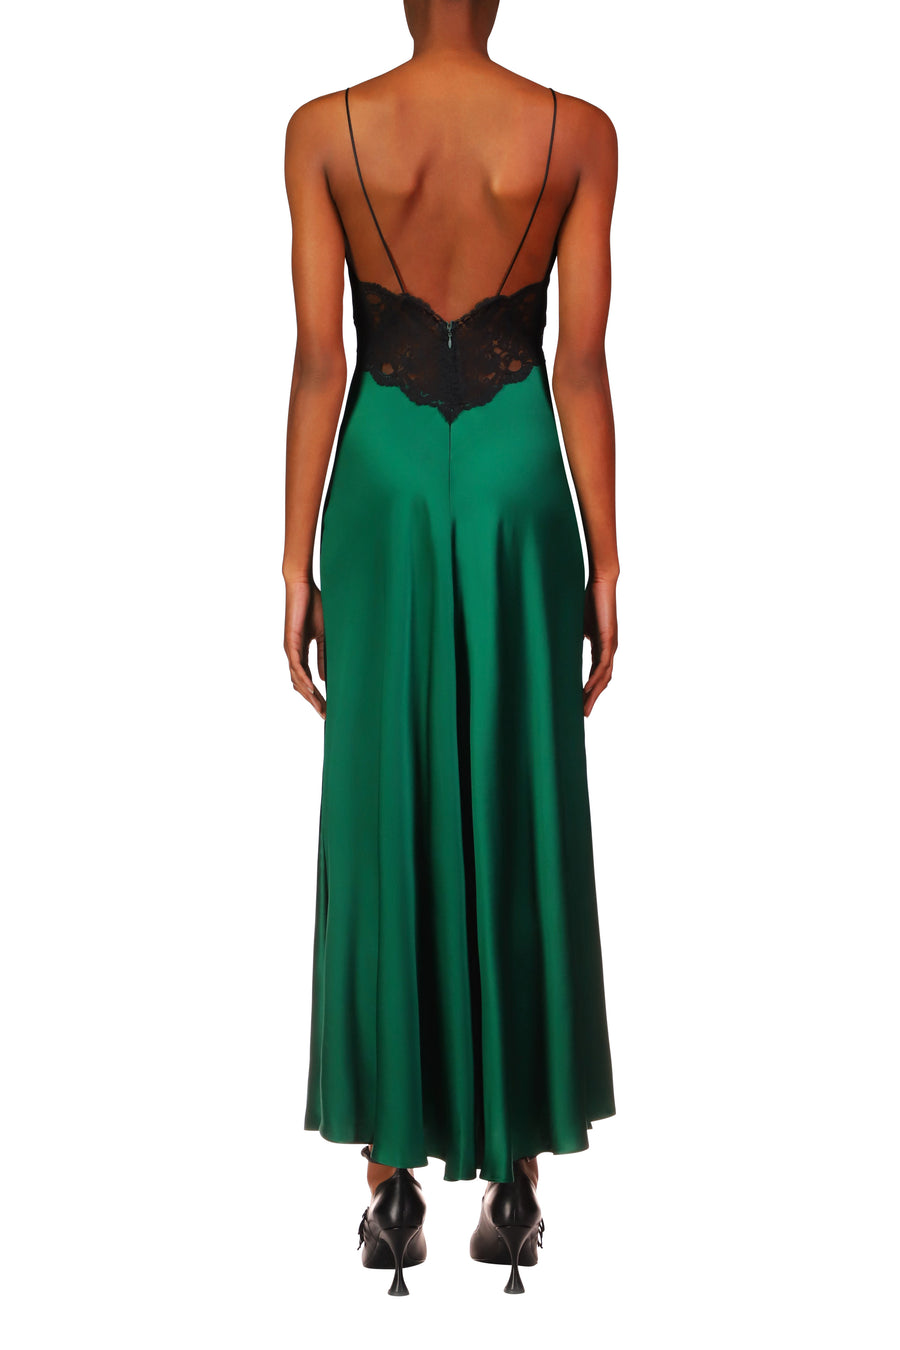 Green Silk Charmeuse Bias Dress With Black Lace